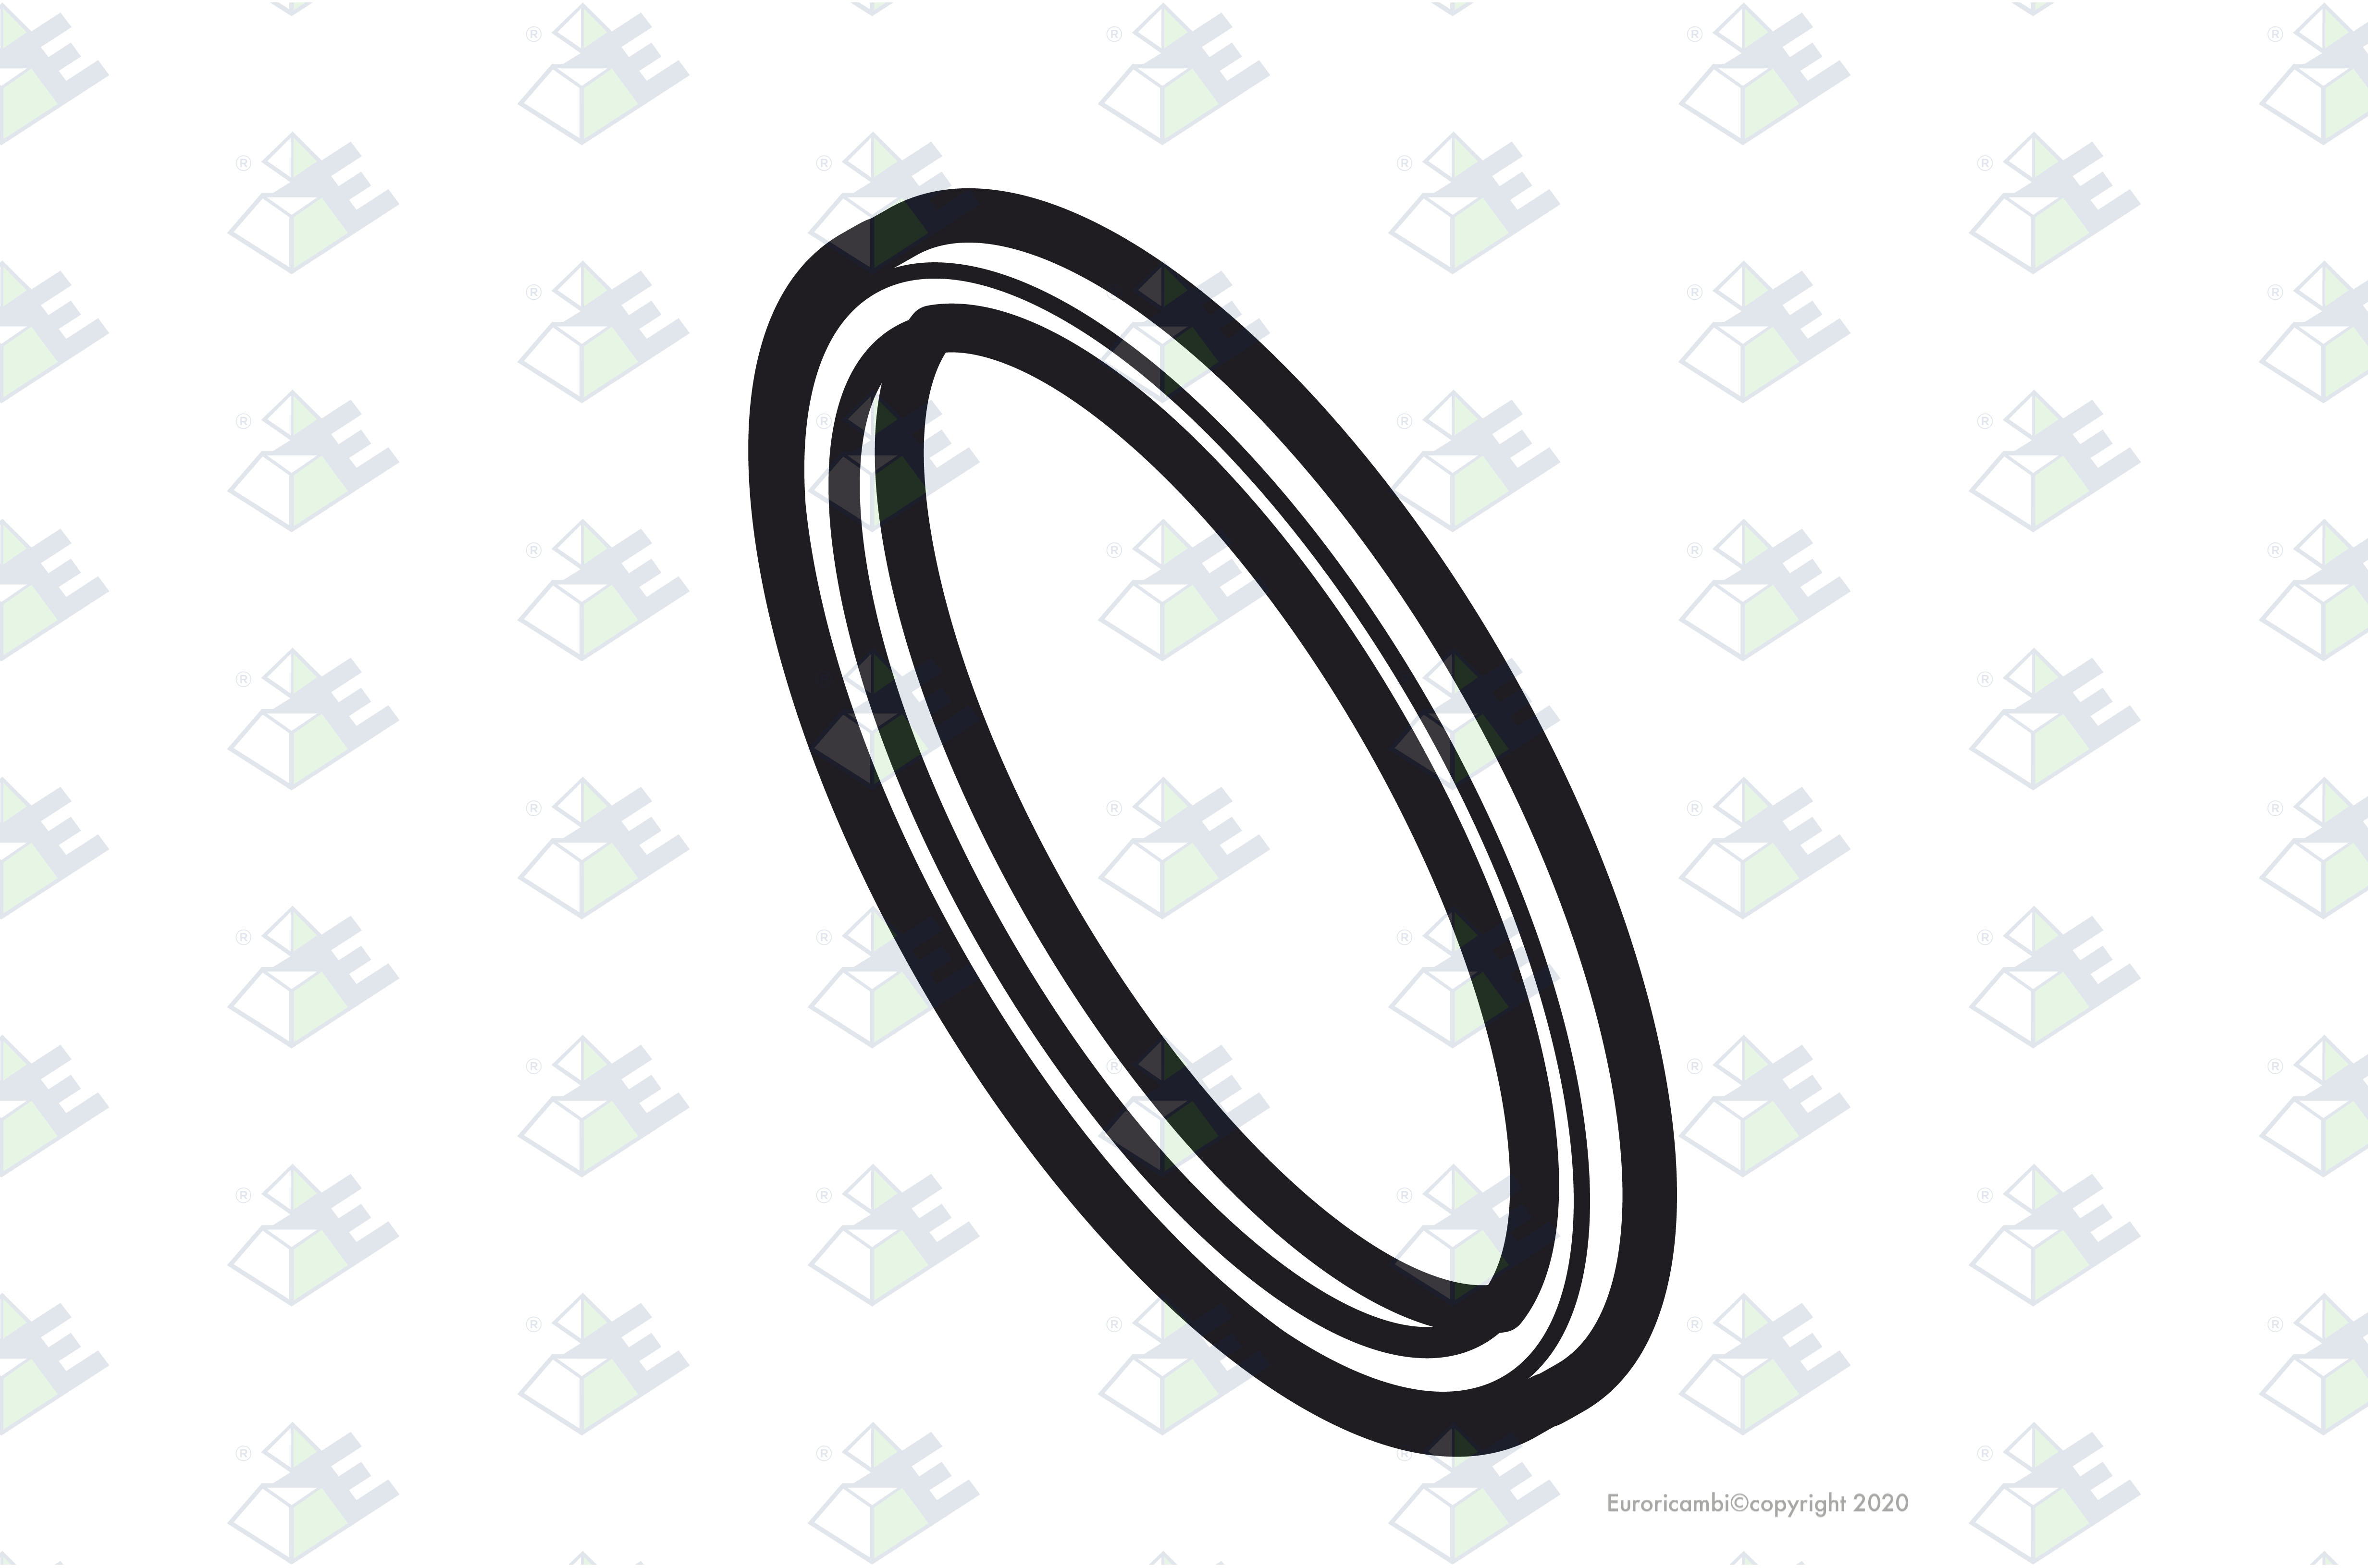 SHIM 0,75 MM suitable to S C A N I A 216186